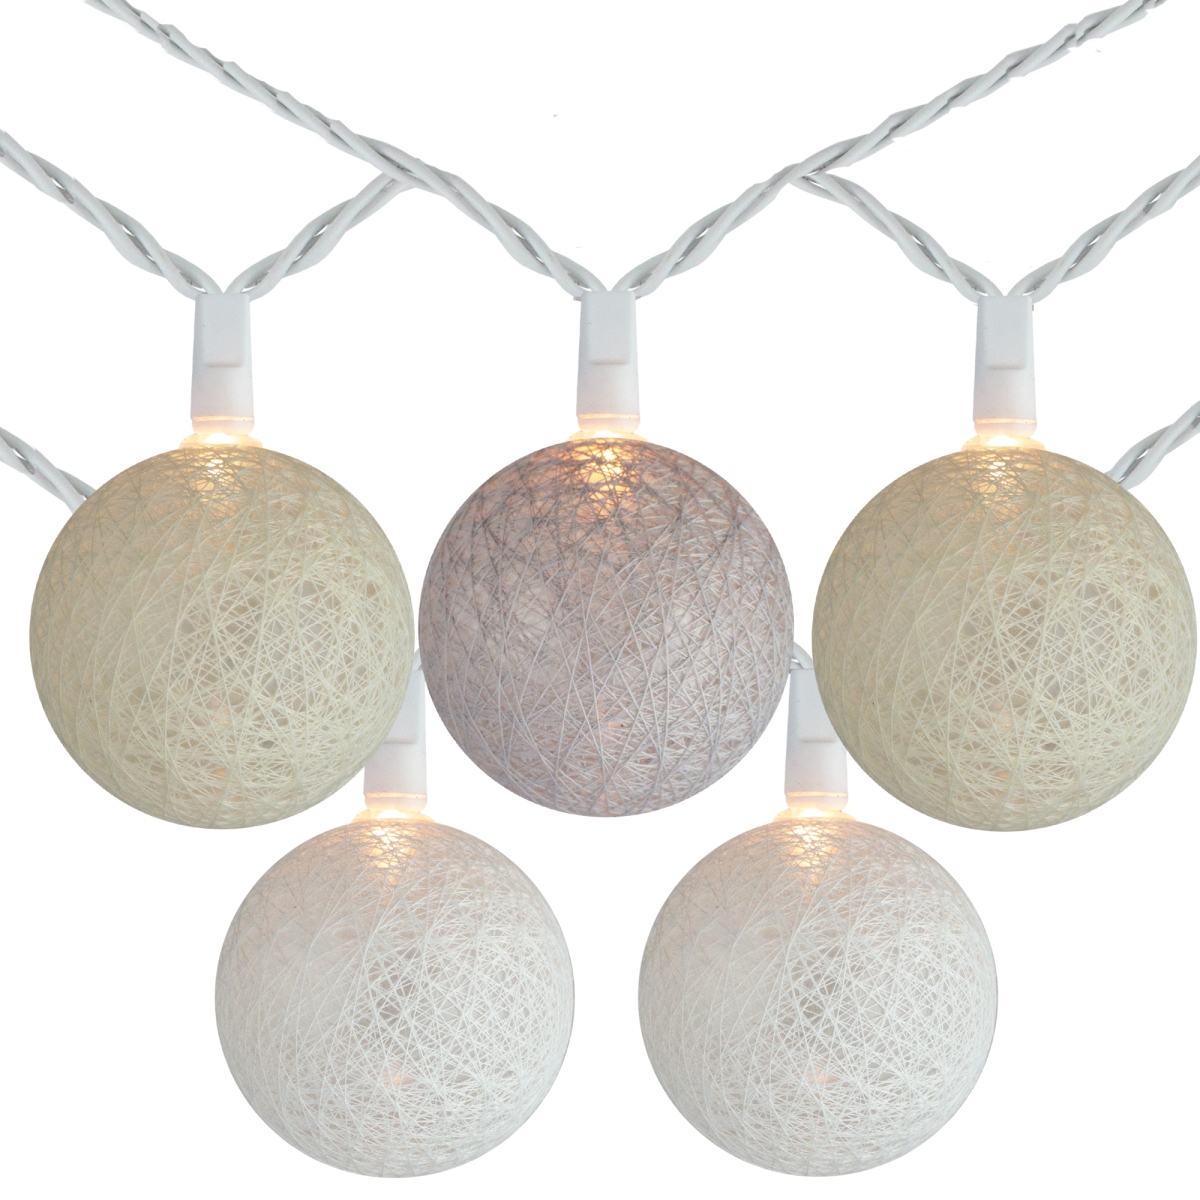 Picture of Brite Star 32915545 10 Neutral Tone Yarn Ball Patio Globe Lights - 8.6 ft. White Wire